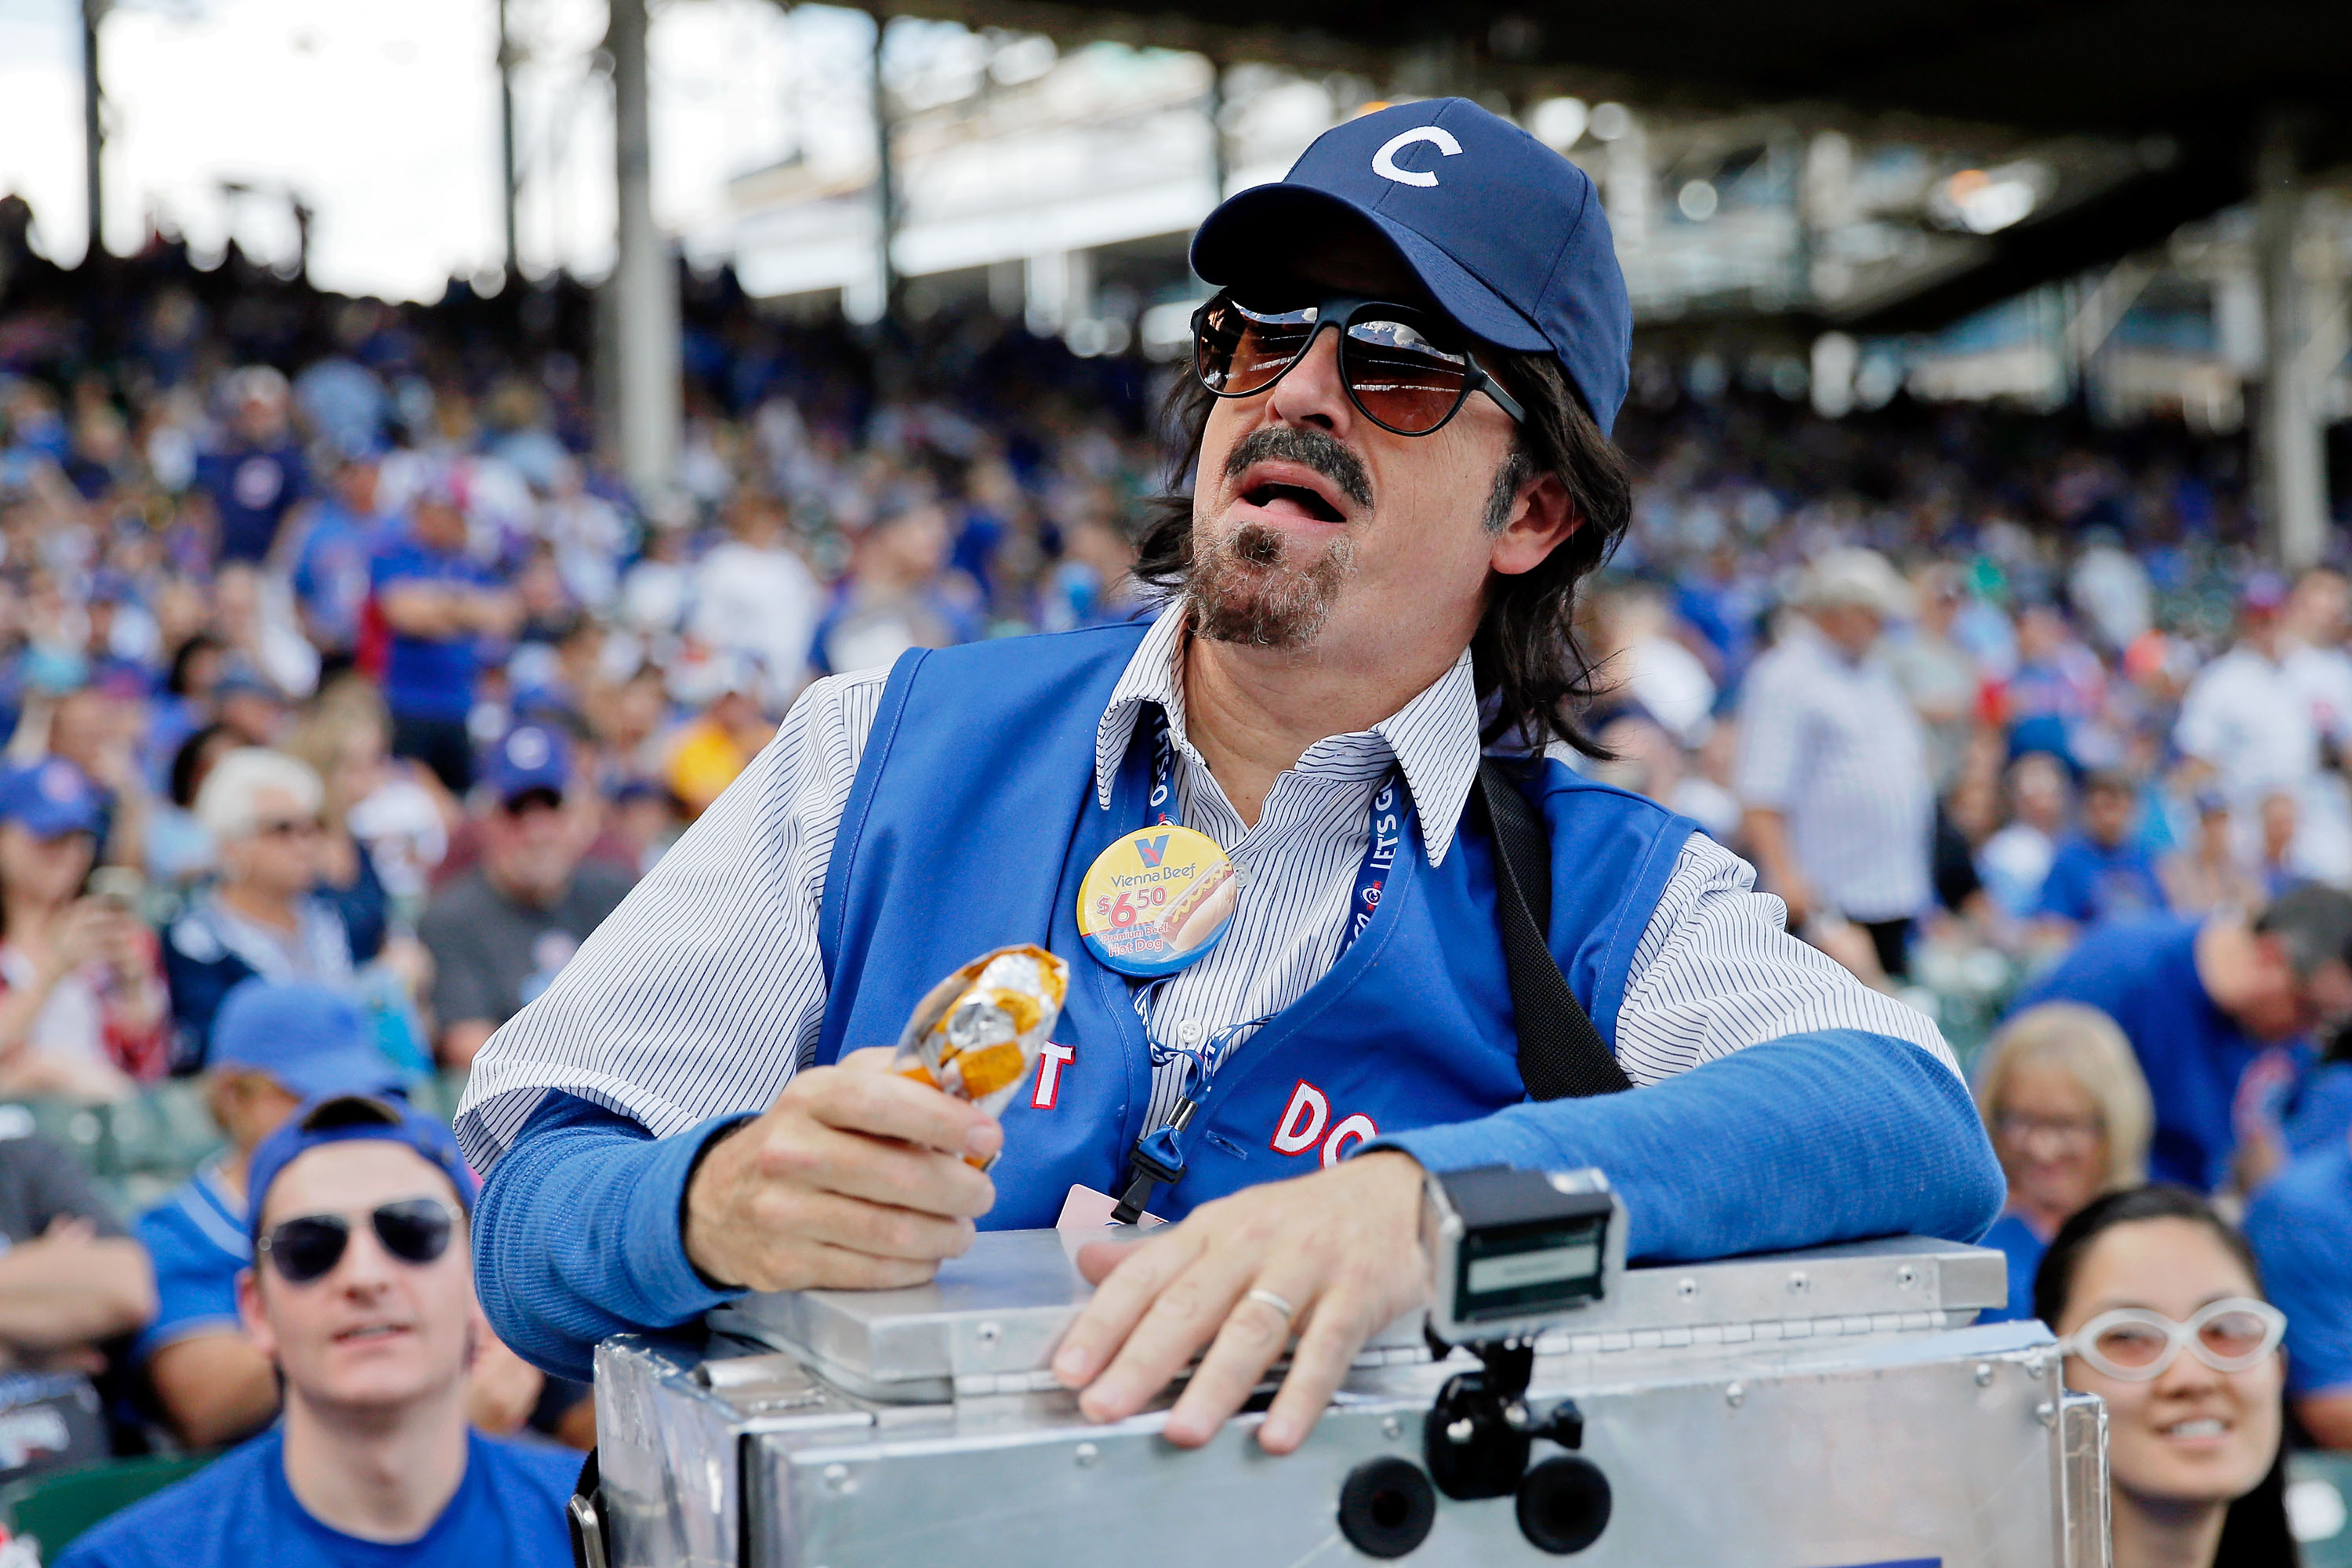 Stephen Colbert attends Cubs game as hot dog vendor for The Late Show